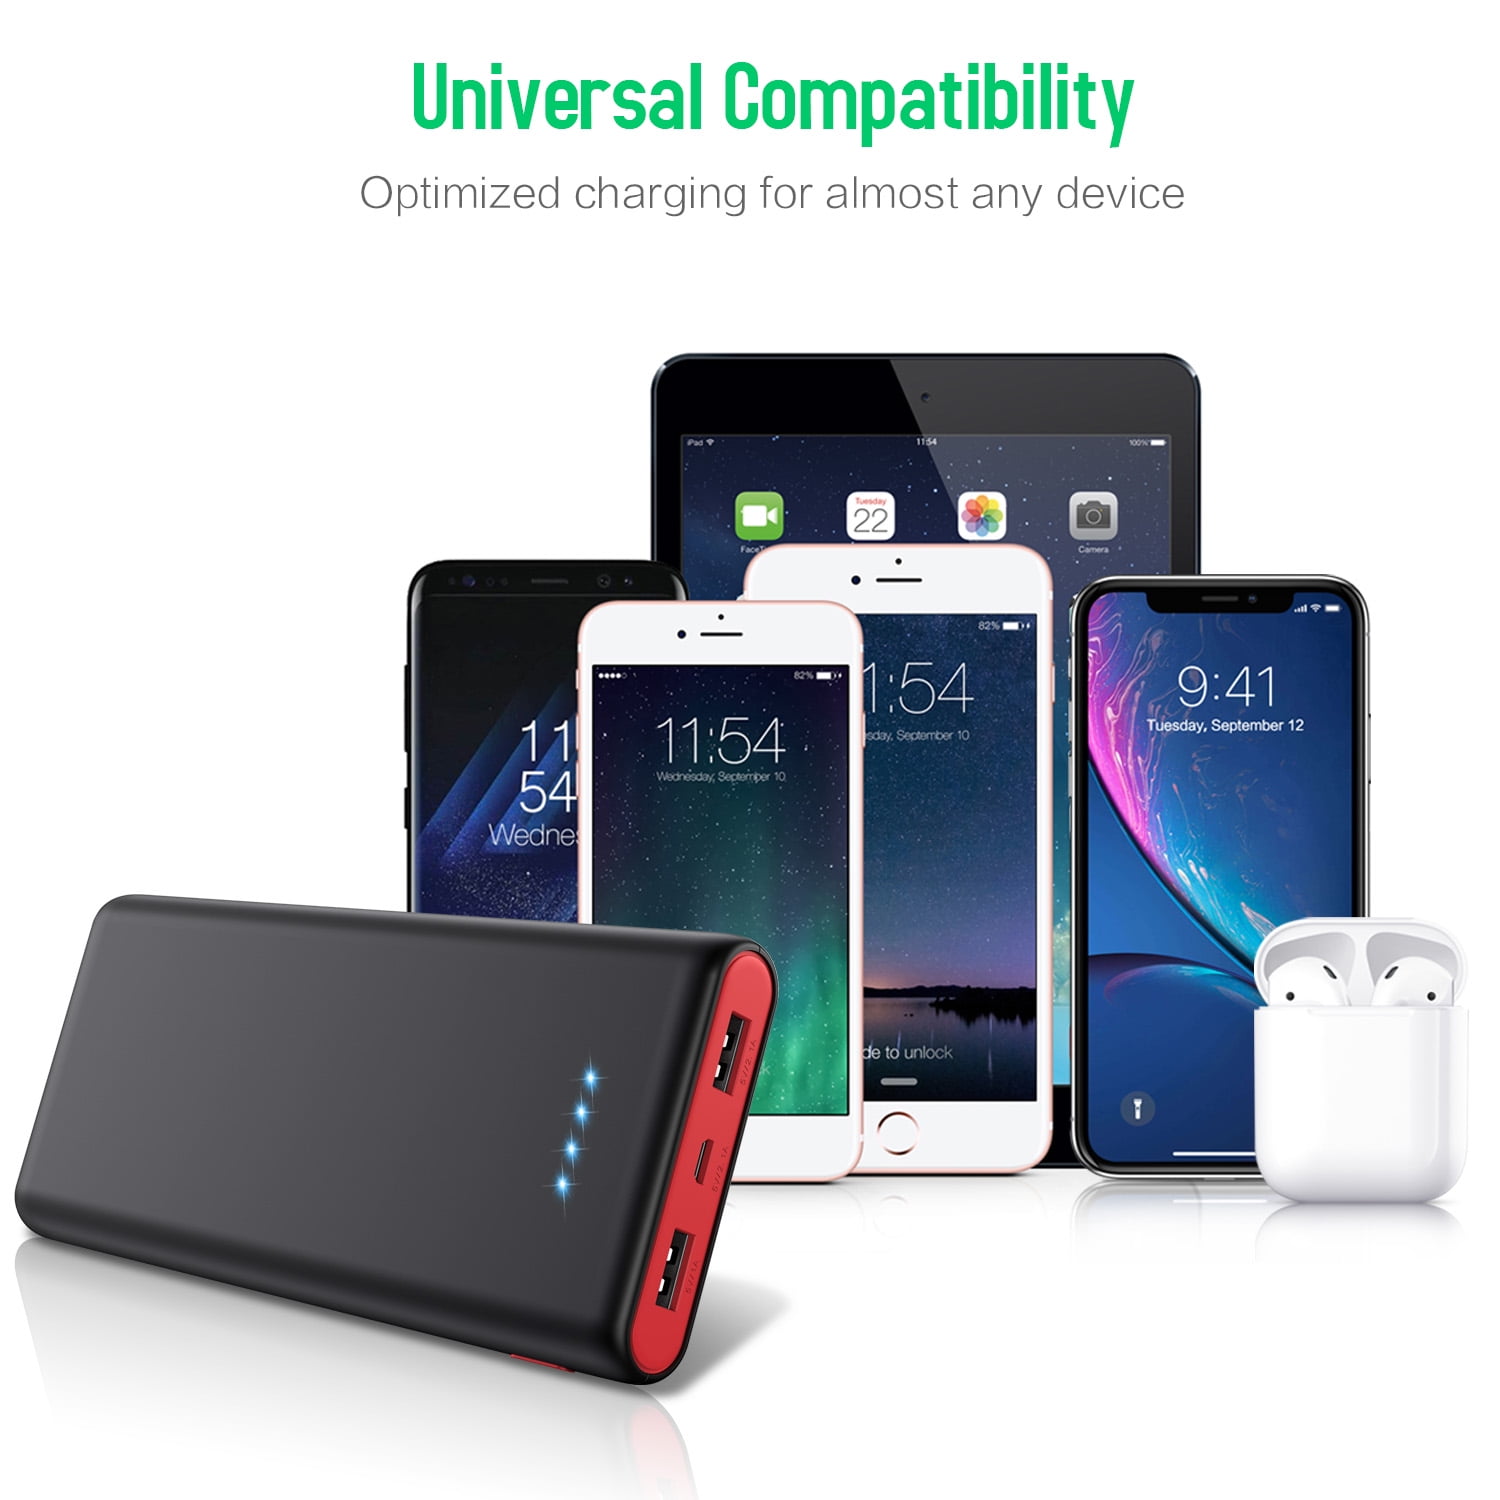 Portable Charger Power Bank 25800mAh, Ultra-High Capacity Fast Phone  Charging with Newest Intelligent Controlling IC, 2 USB Port External Cell  Phone